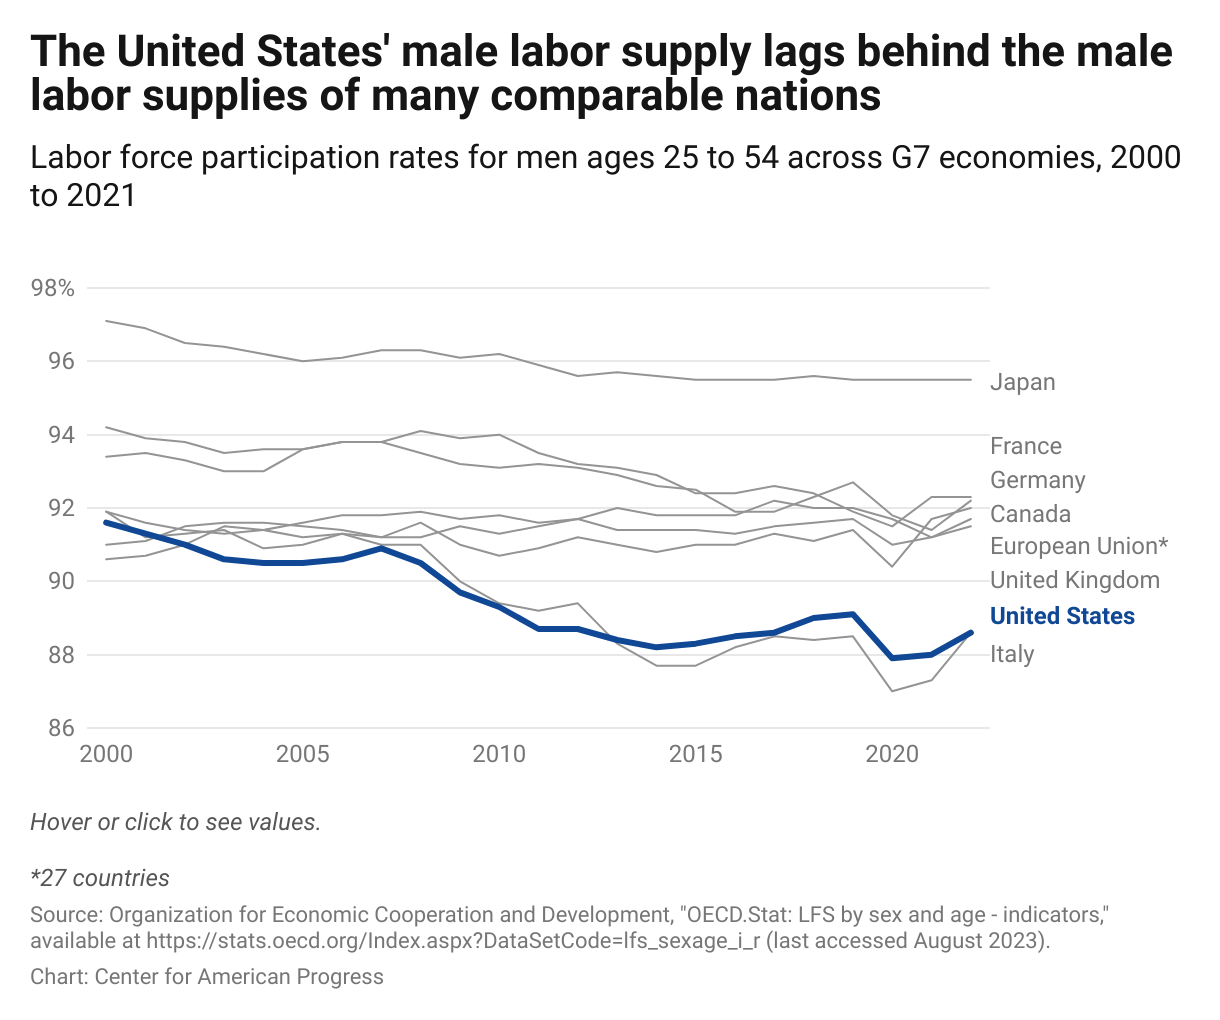 Line graph of labor force participation rates over time for men ages 25 to 54, showing that the United States lags behind other G7 countries.